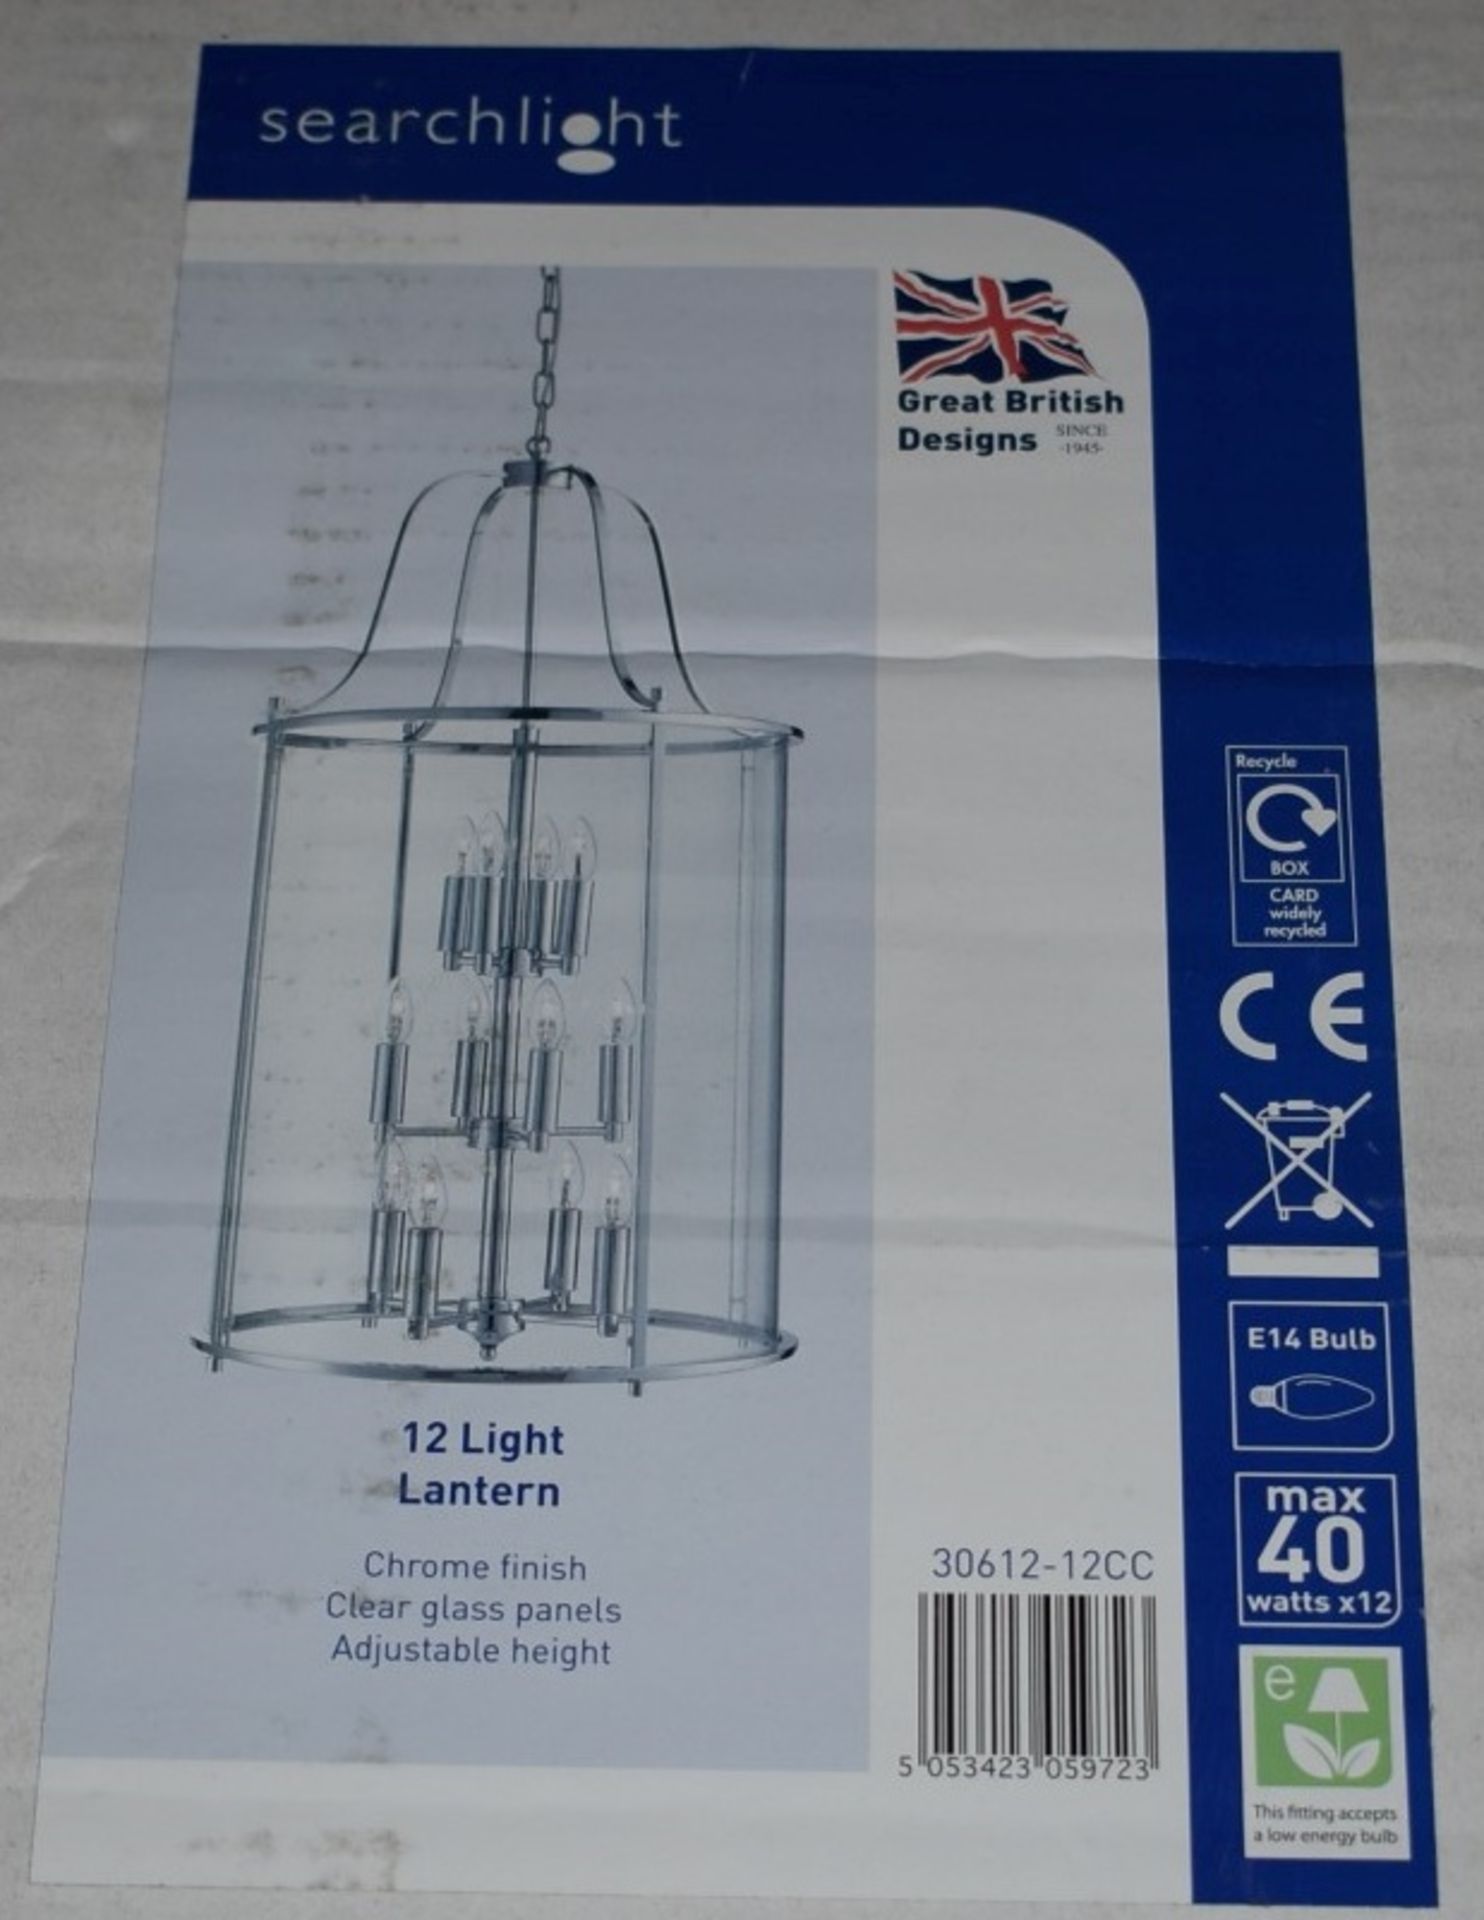 1 x Searchlight 12 Light Lantern With Chrome Finish and Clear Glass Panels - Type 30612-12CC - Ref